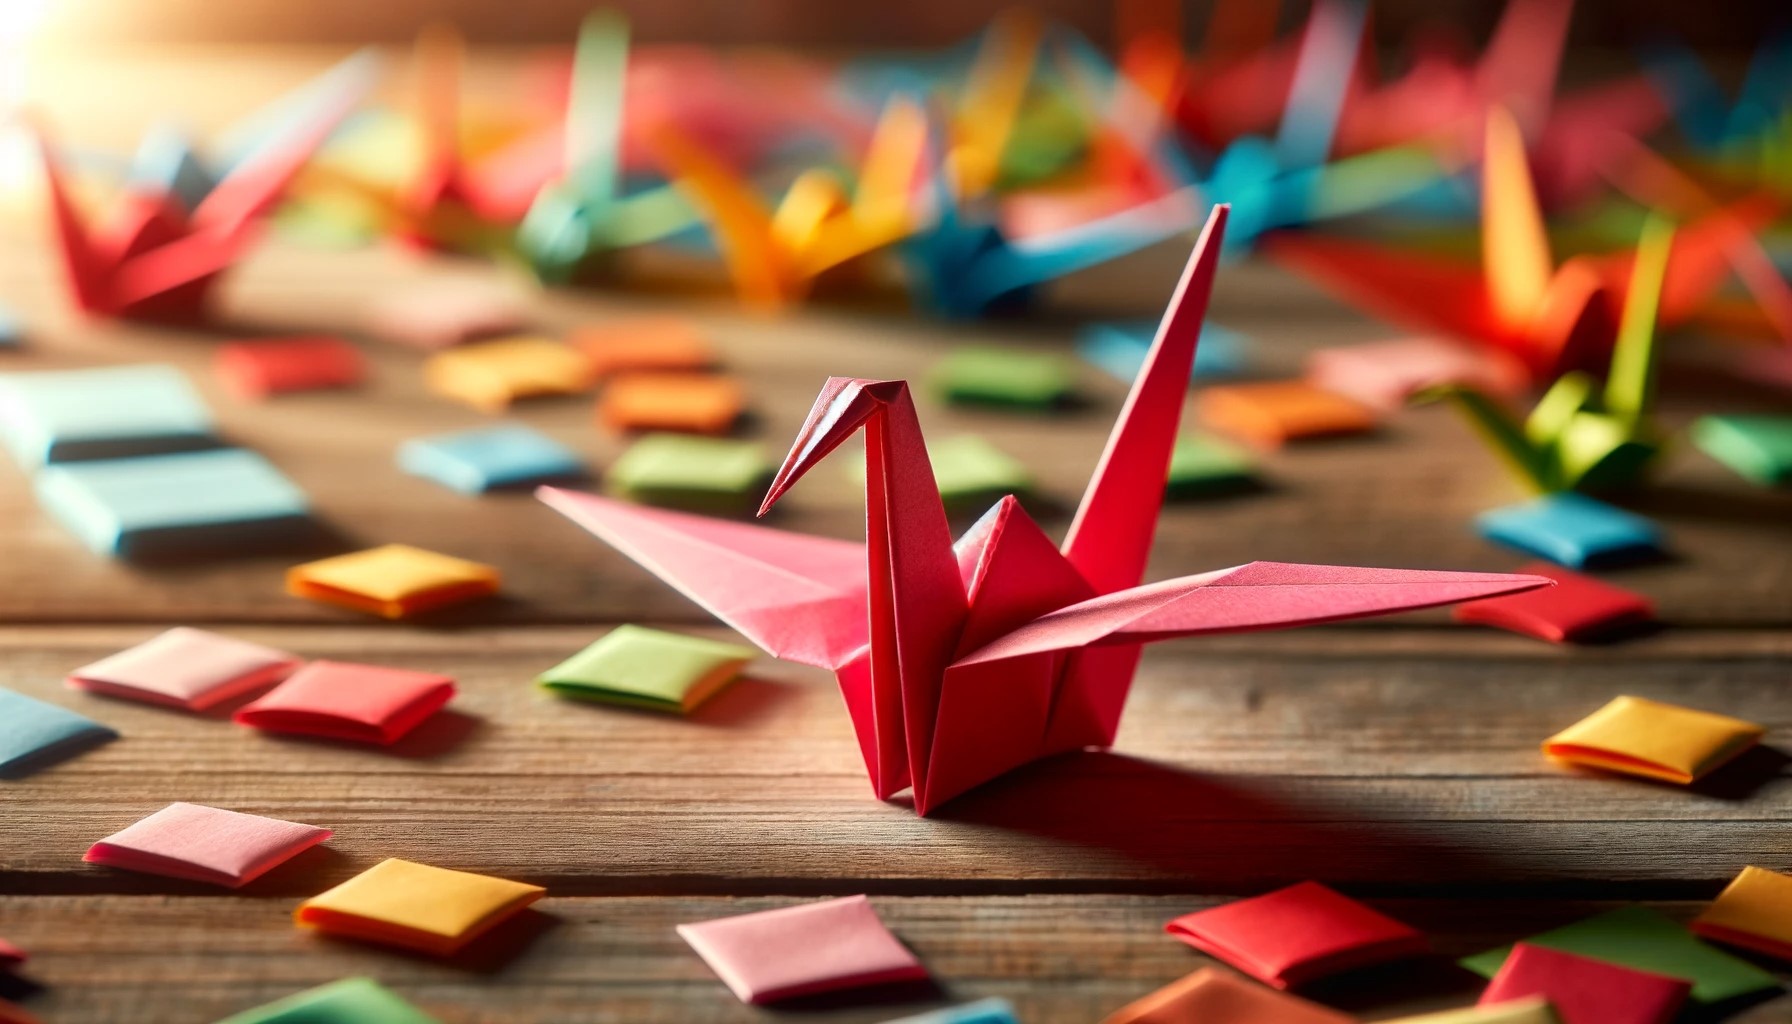 A vibrant origami crane, elegantly folded, sitting on a wooden table surrounded by a few scattered colorful paper squares